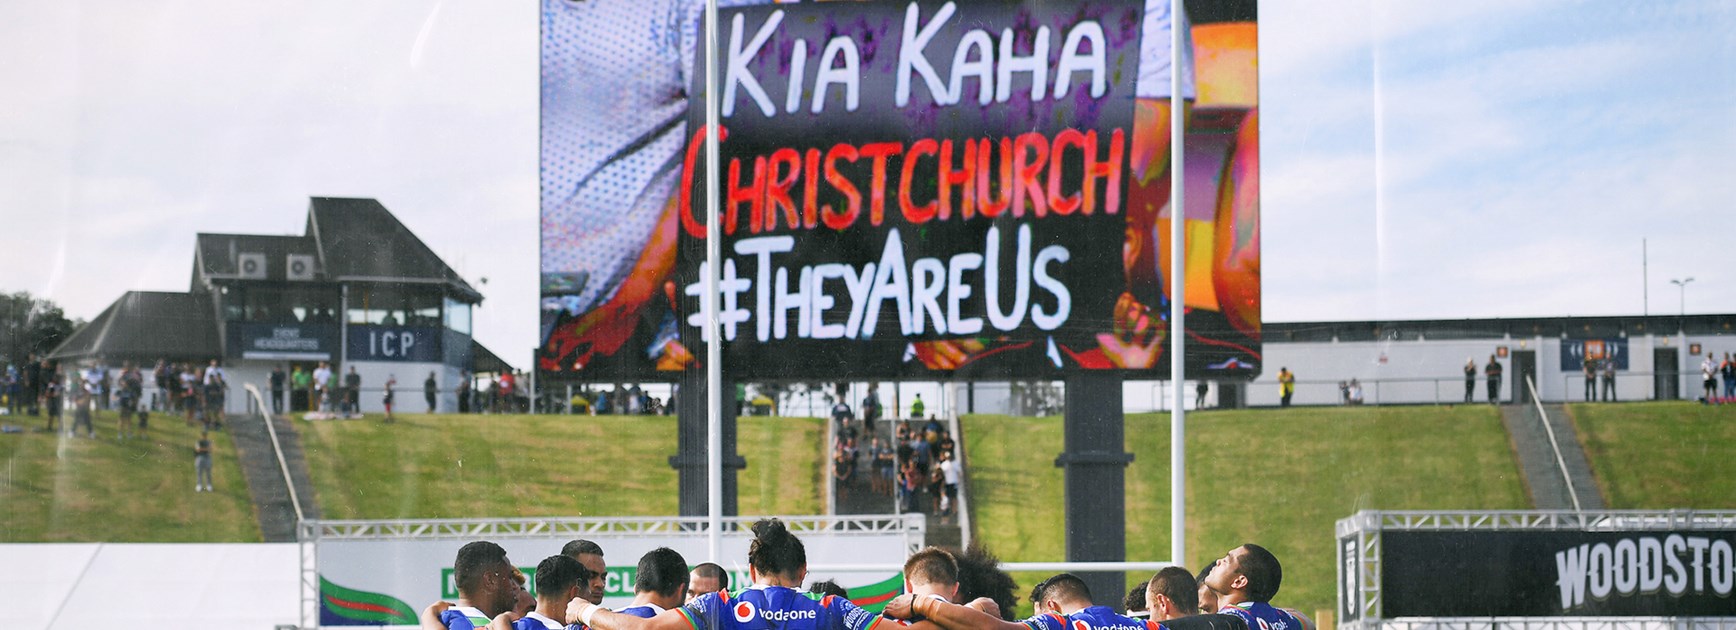 This week's Christchurch schedule confirmed